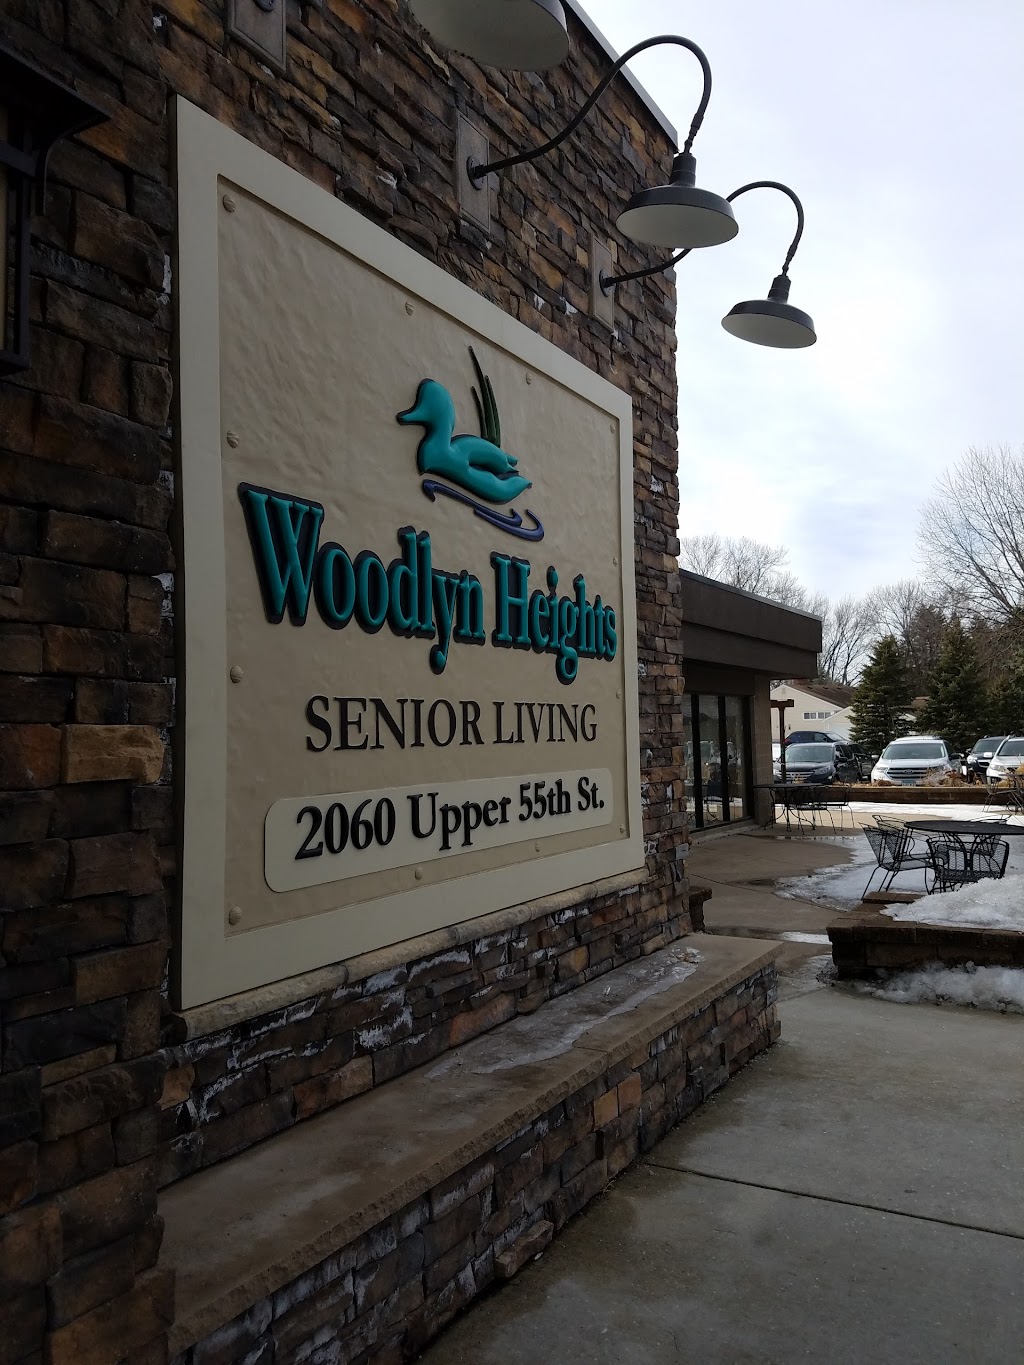 Woodlyn Heights Senior Living | 2060 Upper 55th St E, Inver Grove Heights, MN 55077, USA | Phone: (651) 451-1881